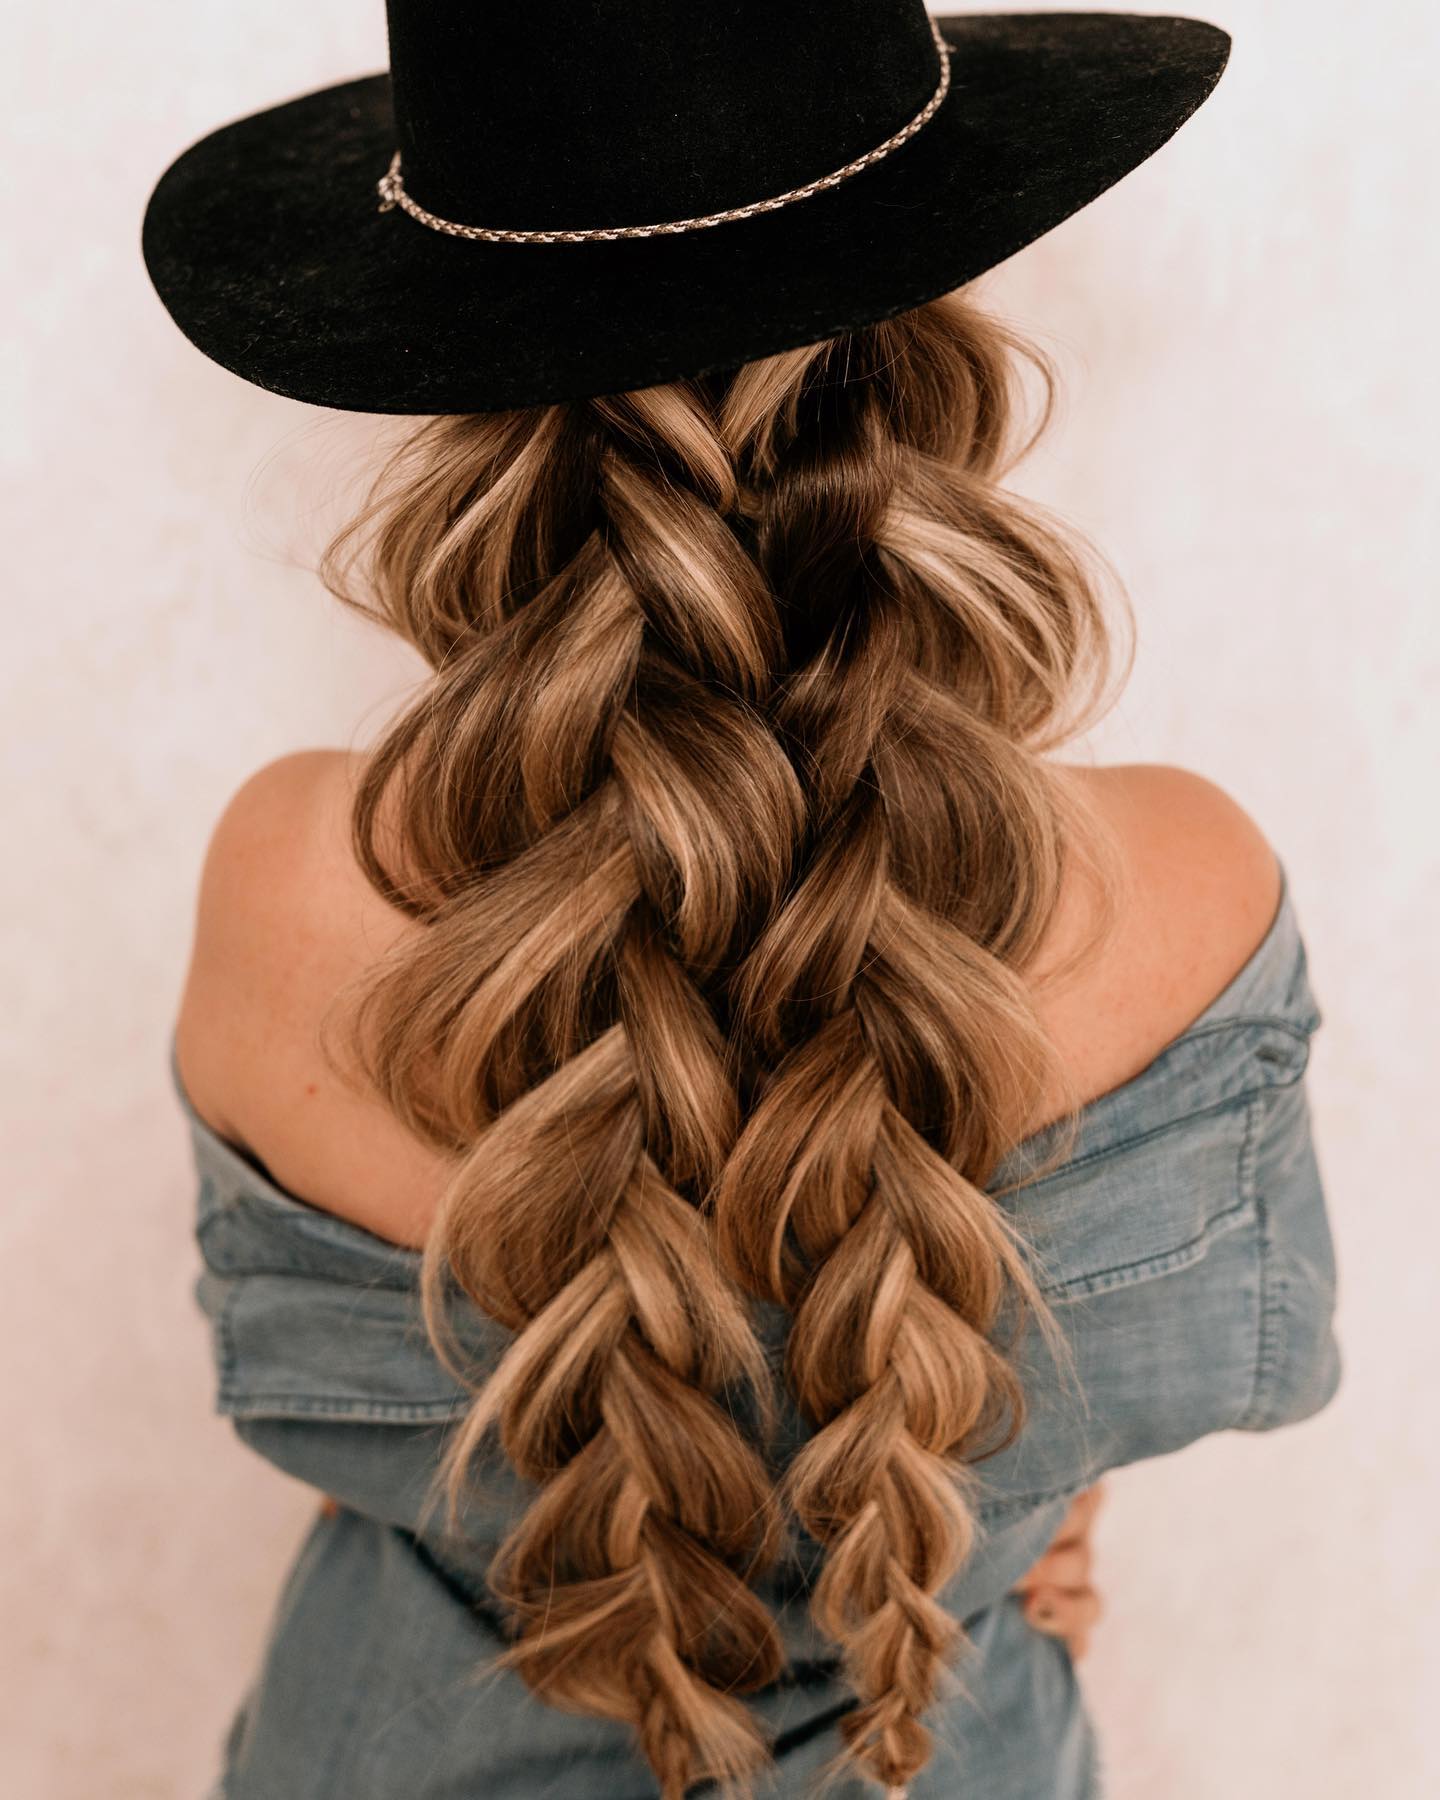 10 Hairstyles You Can Wear To The Beach  The Pool  Beach hairstyles for  long hair Hair styles Pool hairstyles